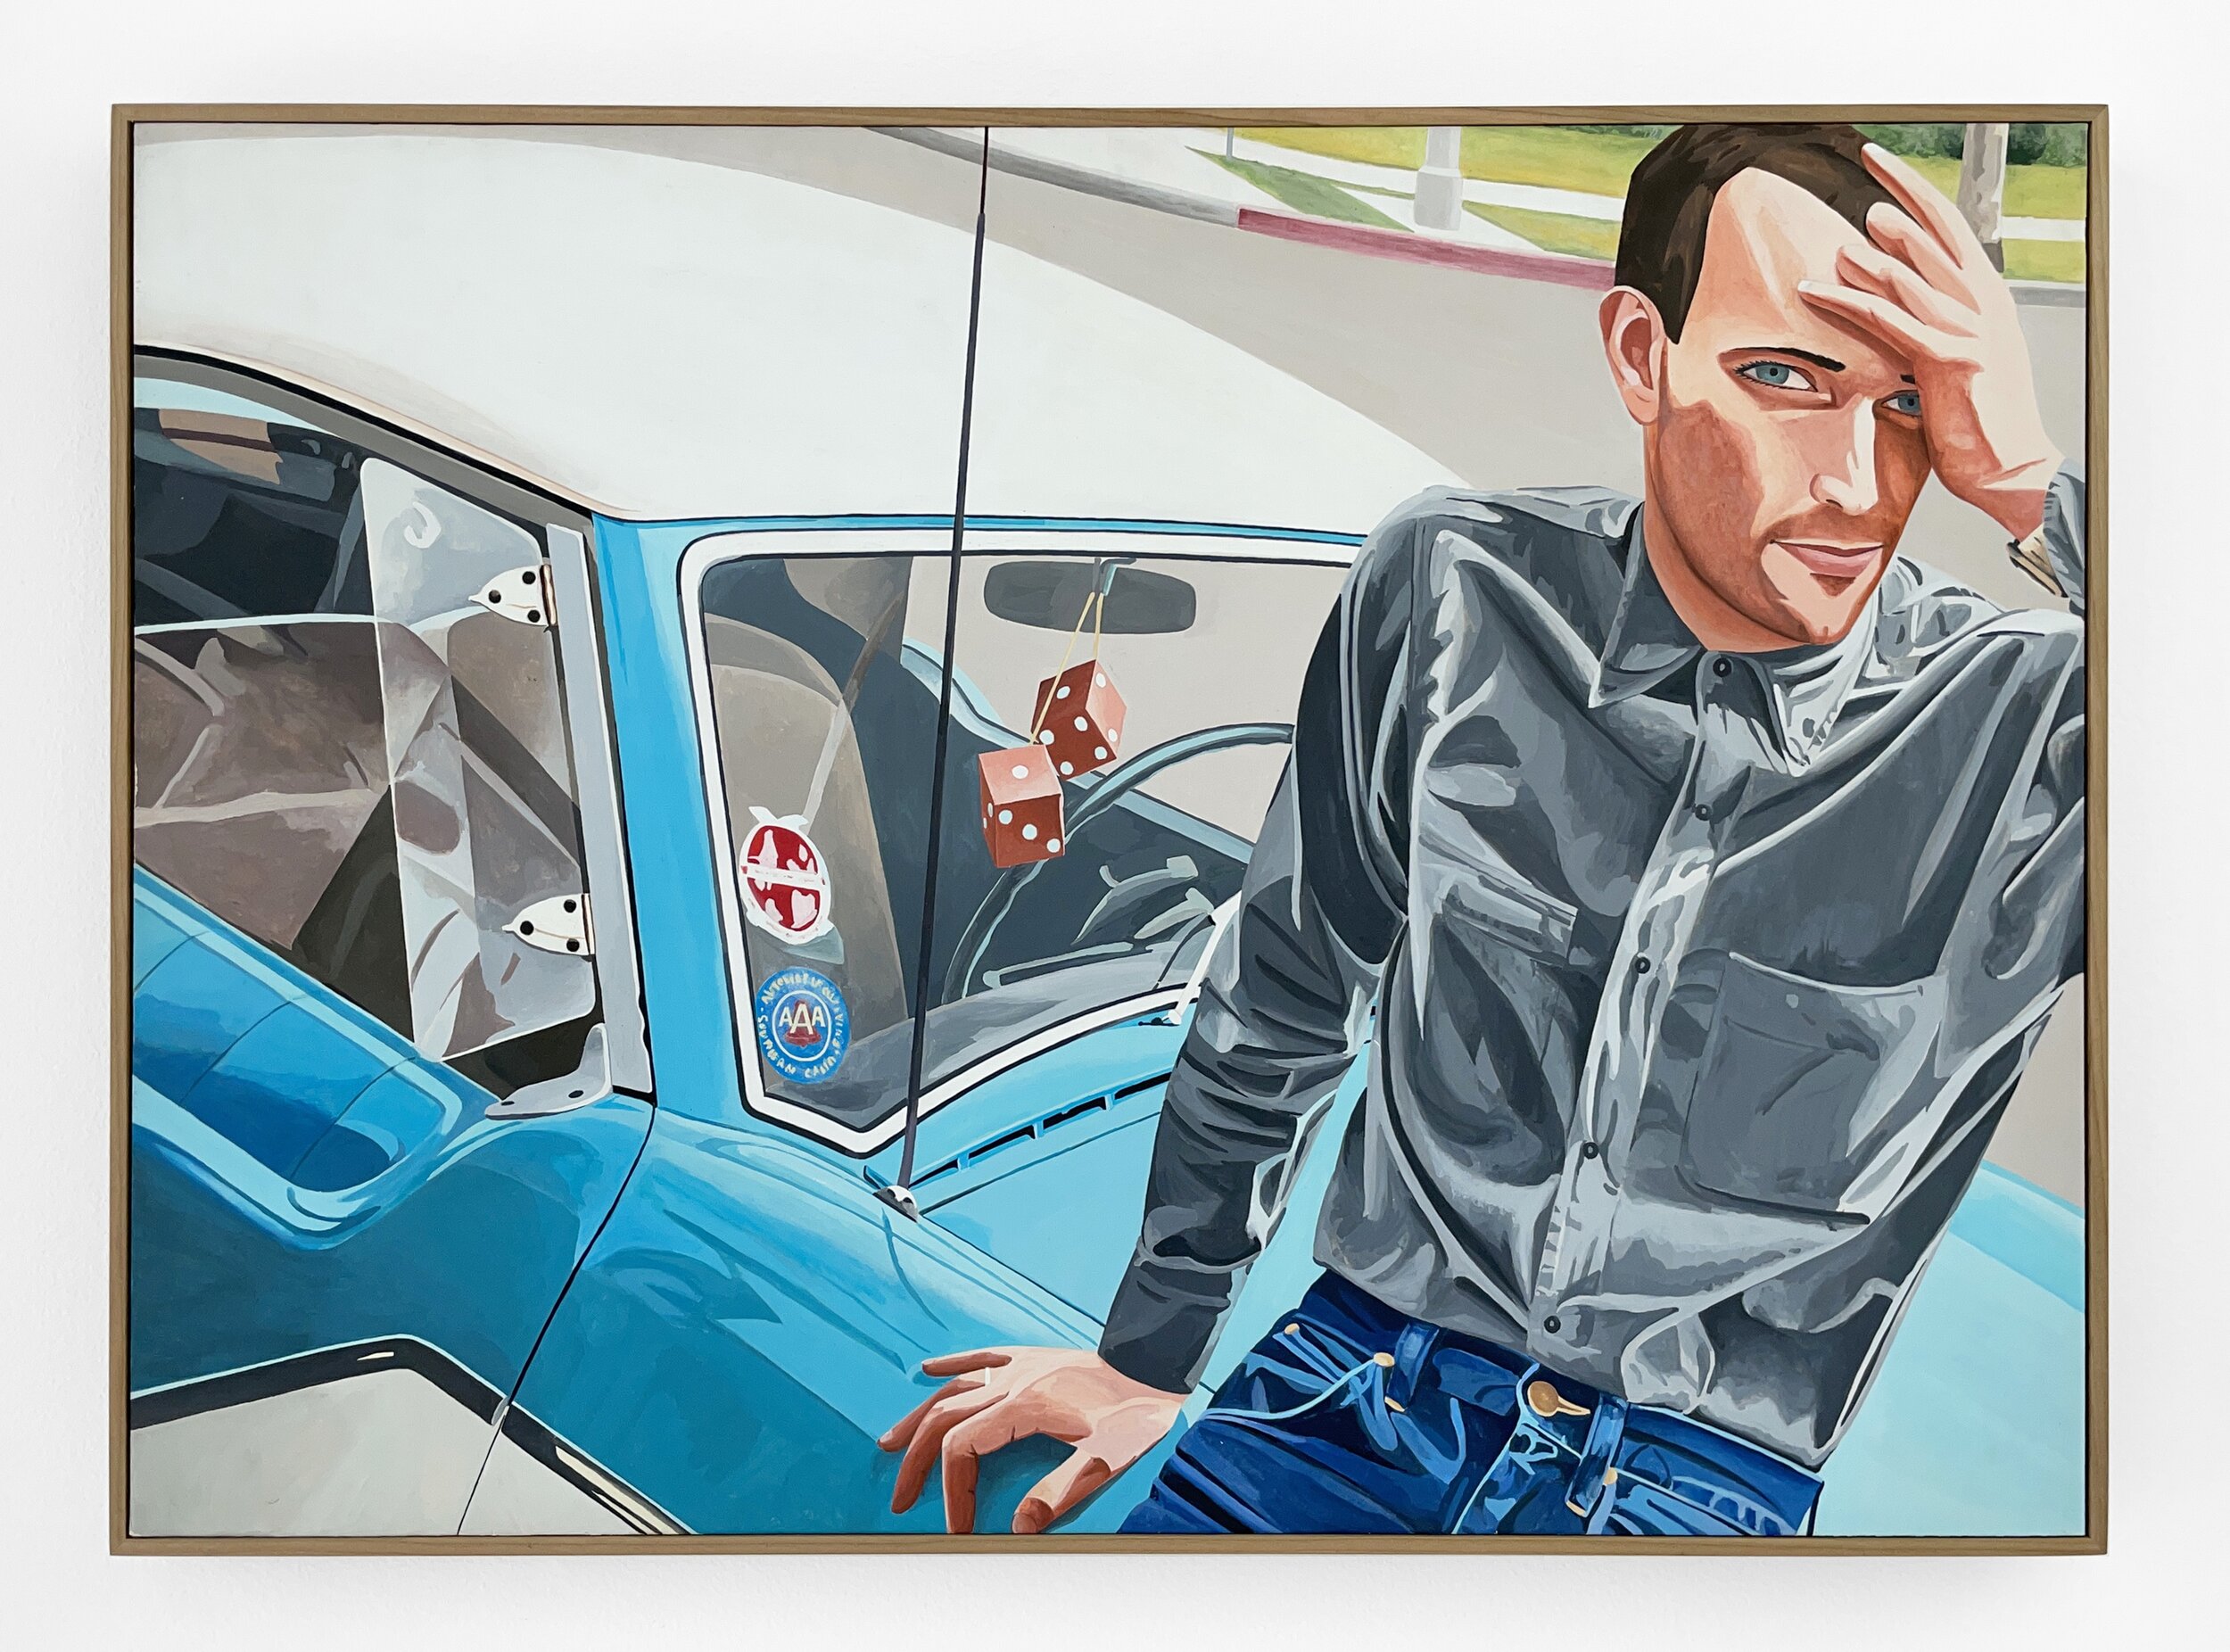  “Jules”, 1980, Acrylic on board, mounted on panel, 20.5 x 28.5 inches 